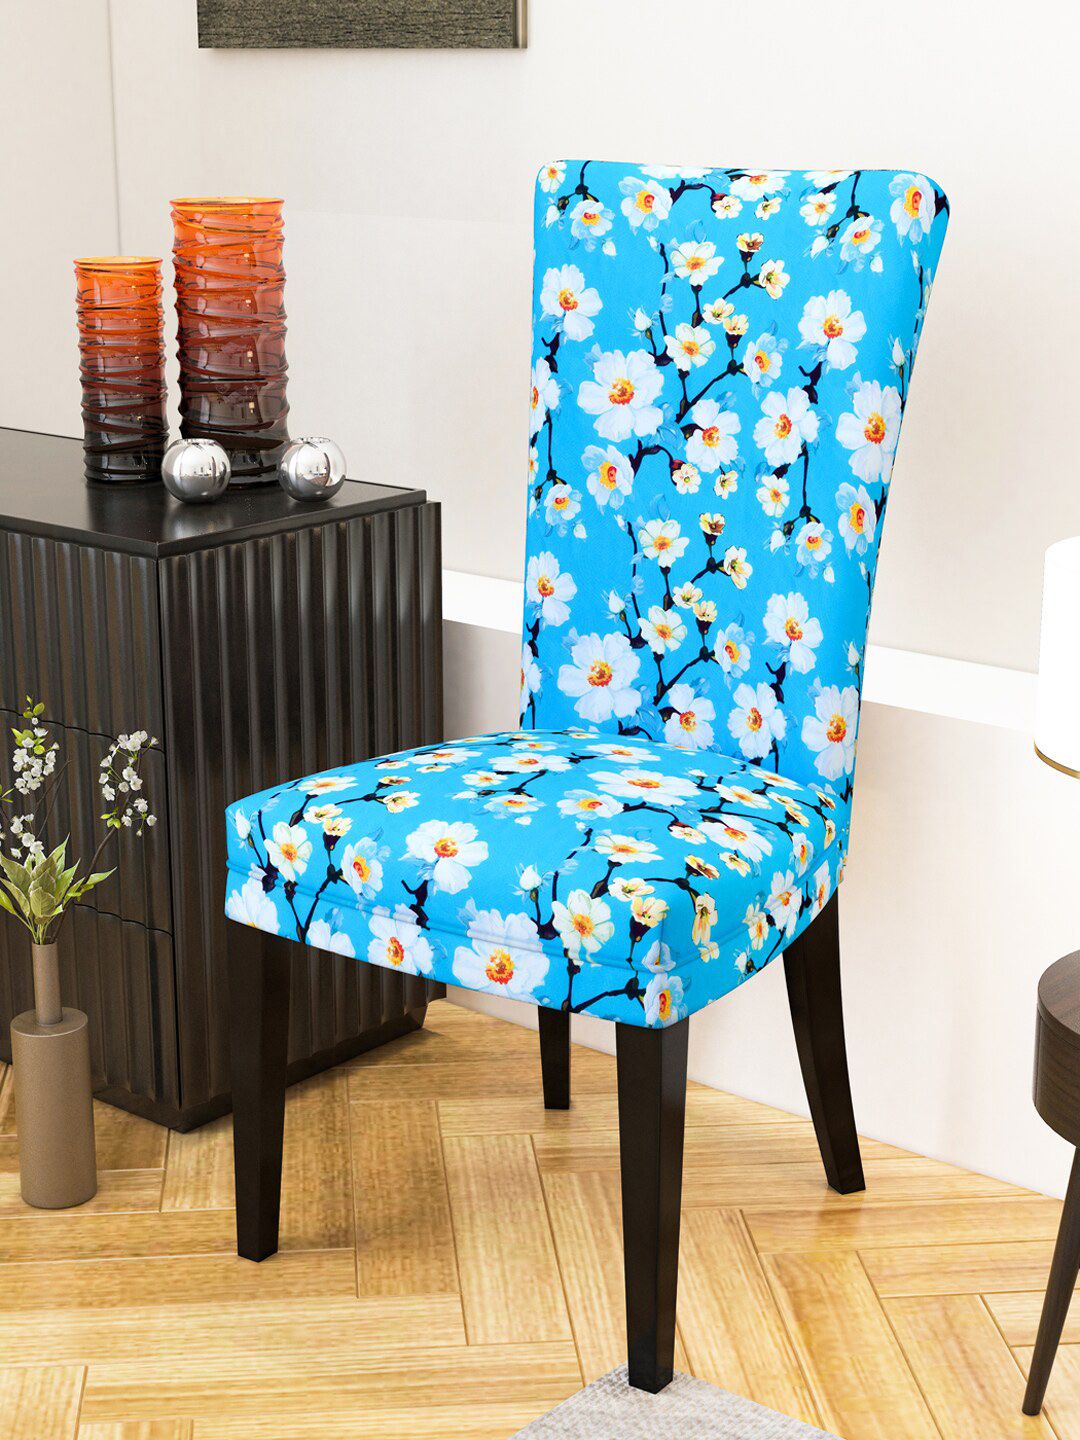 Nendle Set Of 4 Printed Chair Covers Price in India